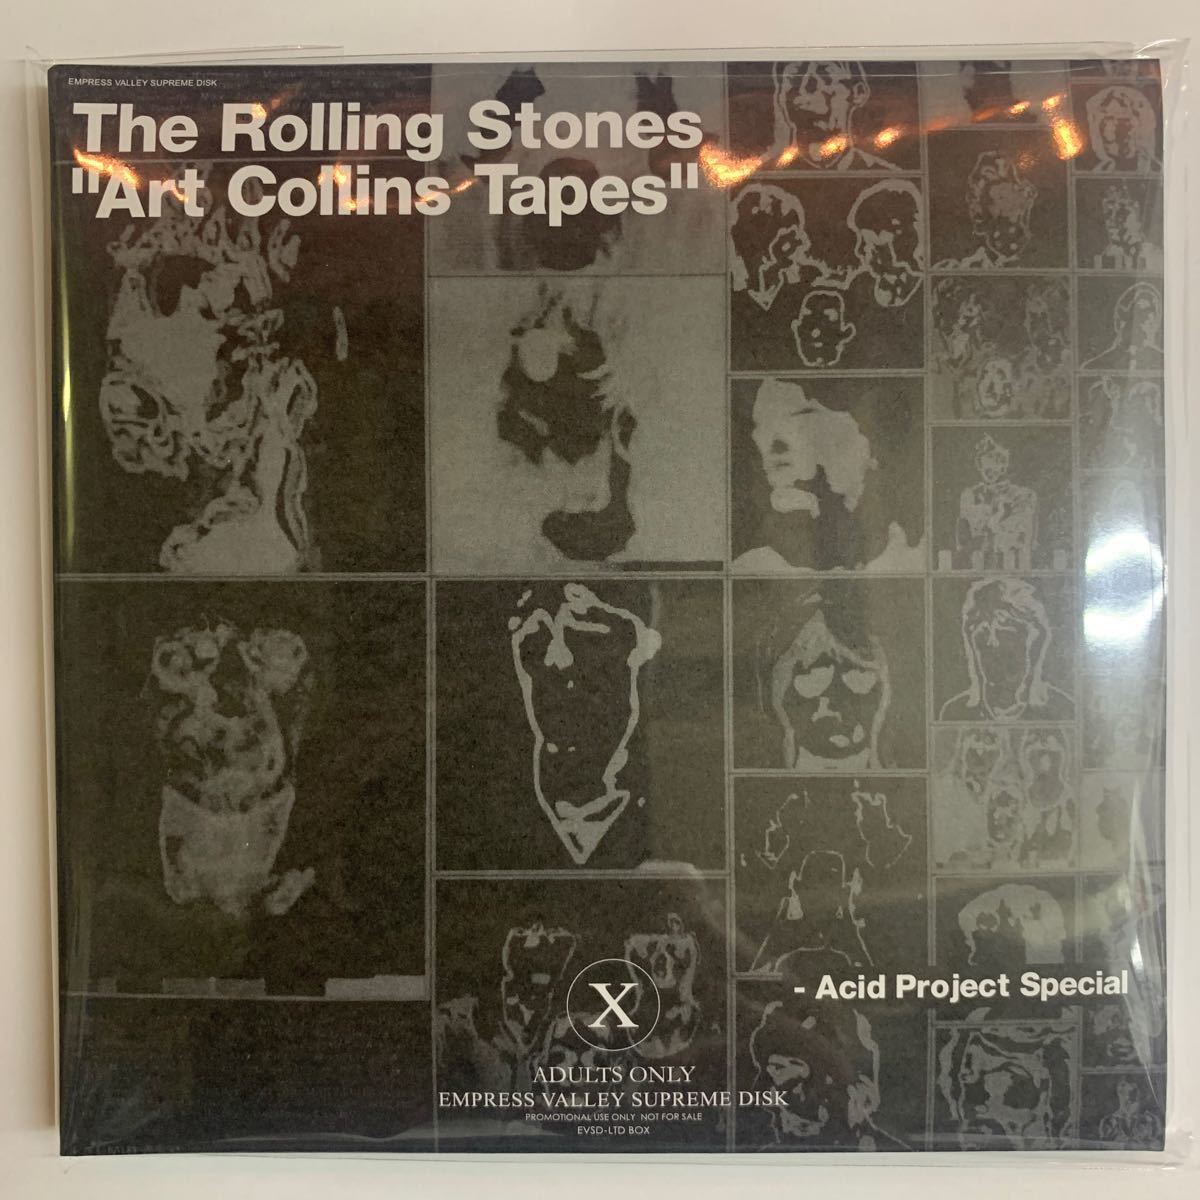 THE ROLLING STONES / Art Collins Tapes Acid Project Special Version (2023) 4CD 最新バージョン！極上の音質で堪能できる50トラック！_画像1